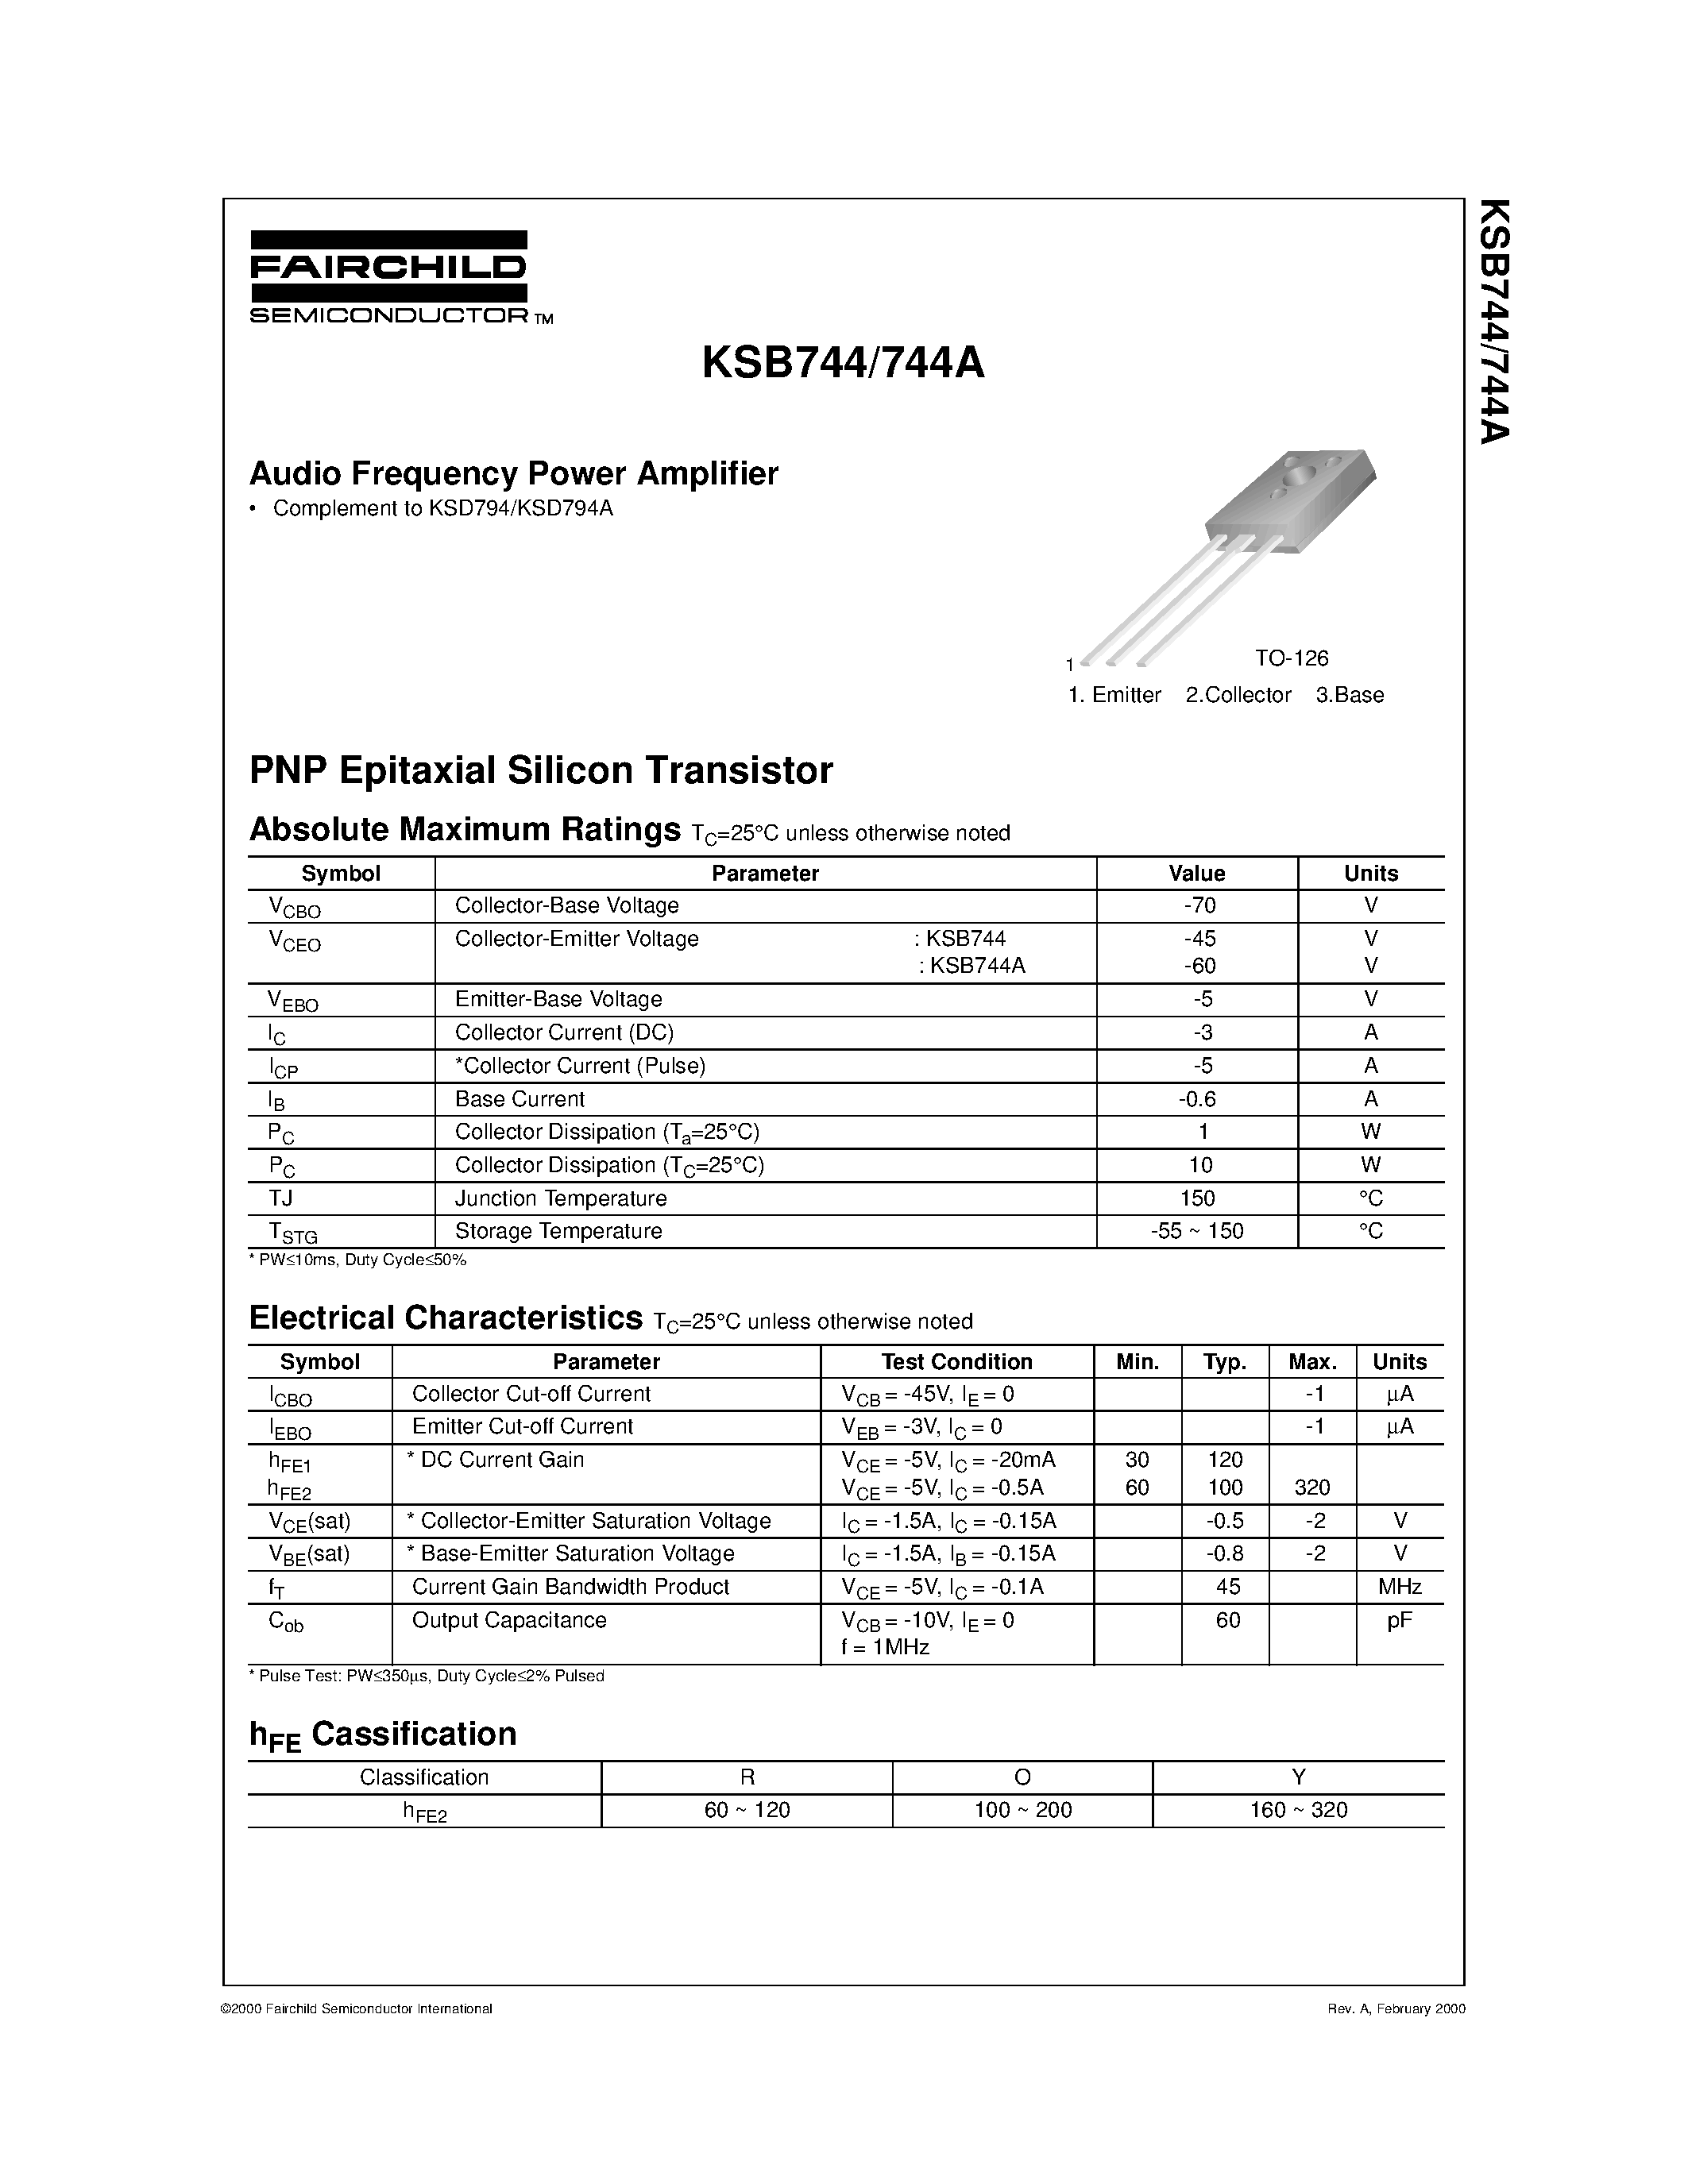 Datasheet KSB744 - Audio Frequency Power Amplifier page 1